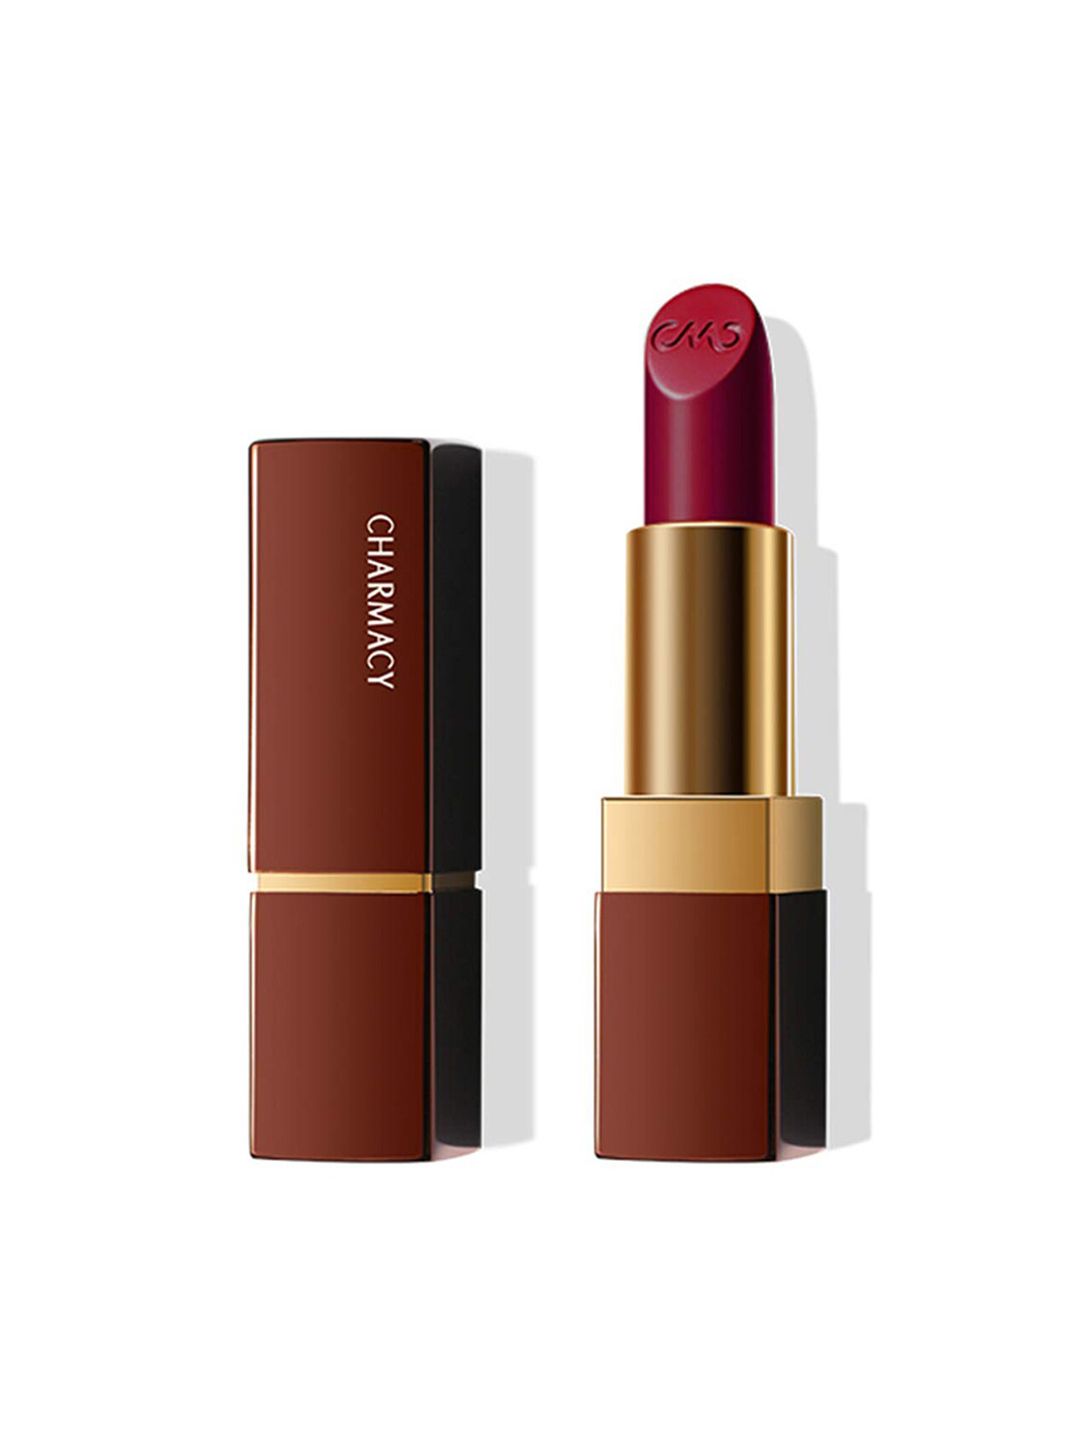 Charmacy Milano Luxe Creme Lipstick - Cherry Red 11 Price in India